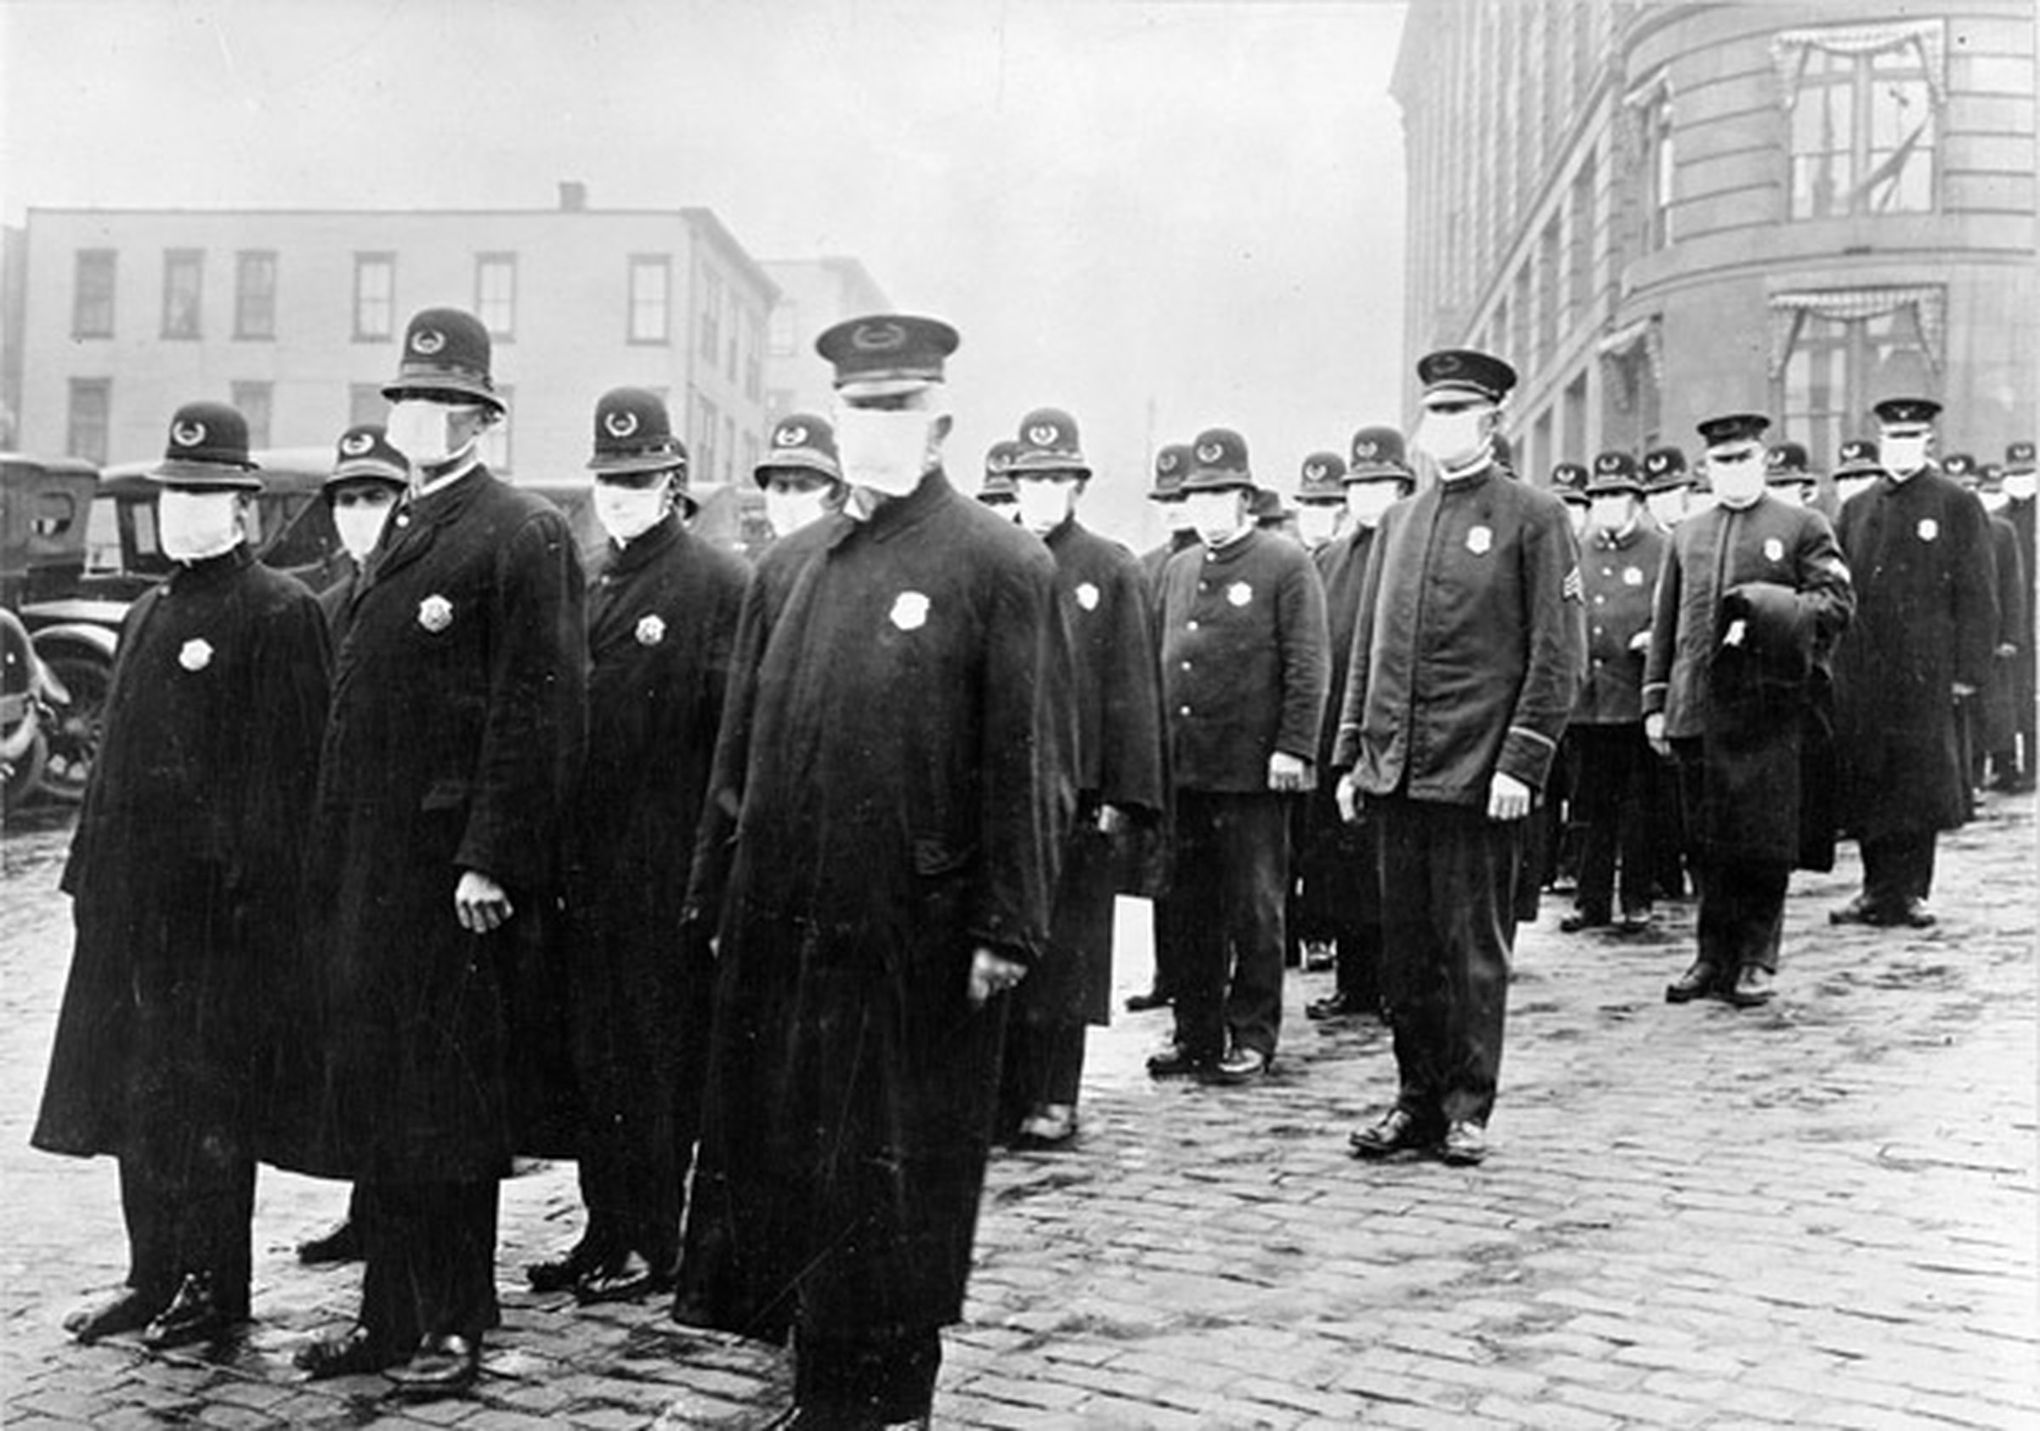 Everyone wore masks during the 1918 flu pandemic. They were useless.